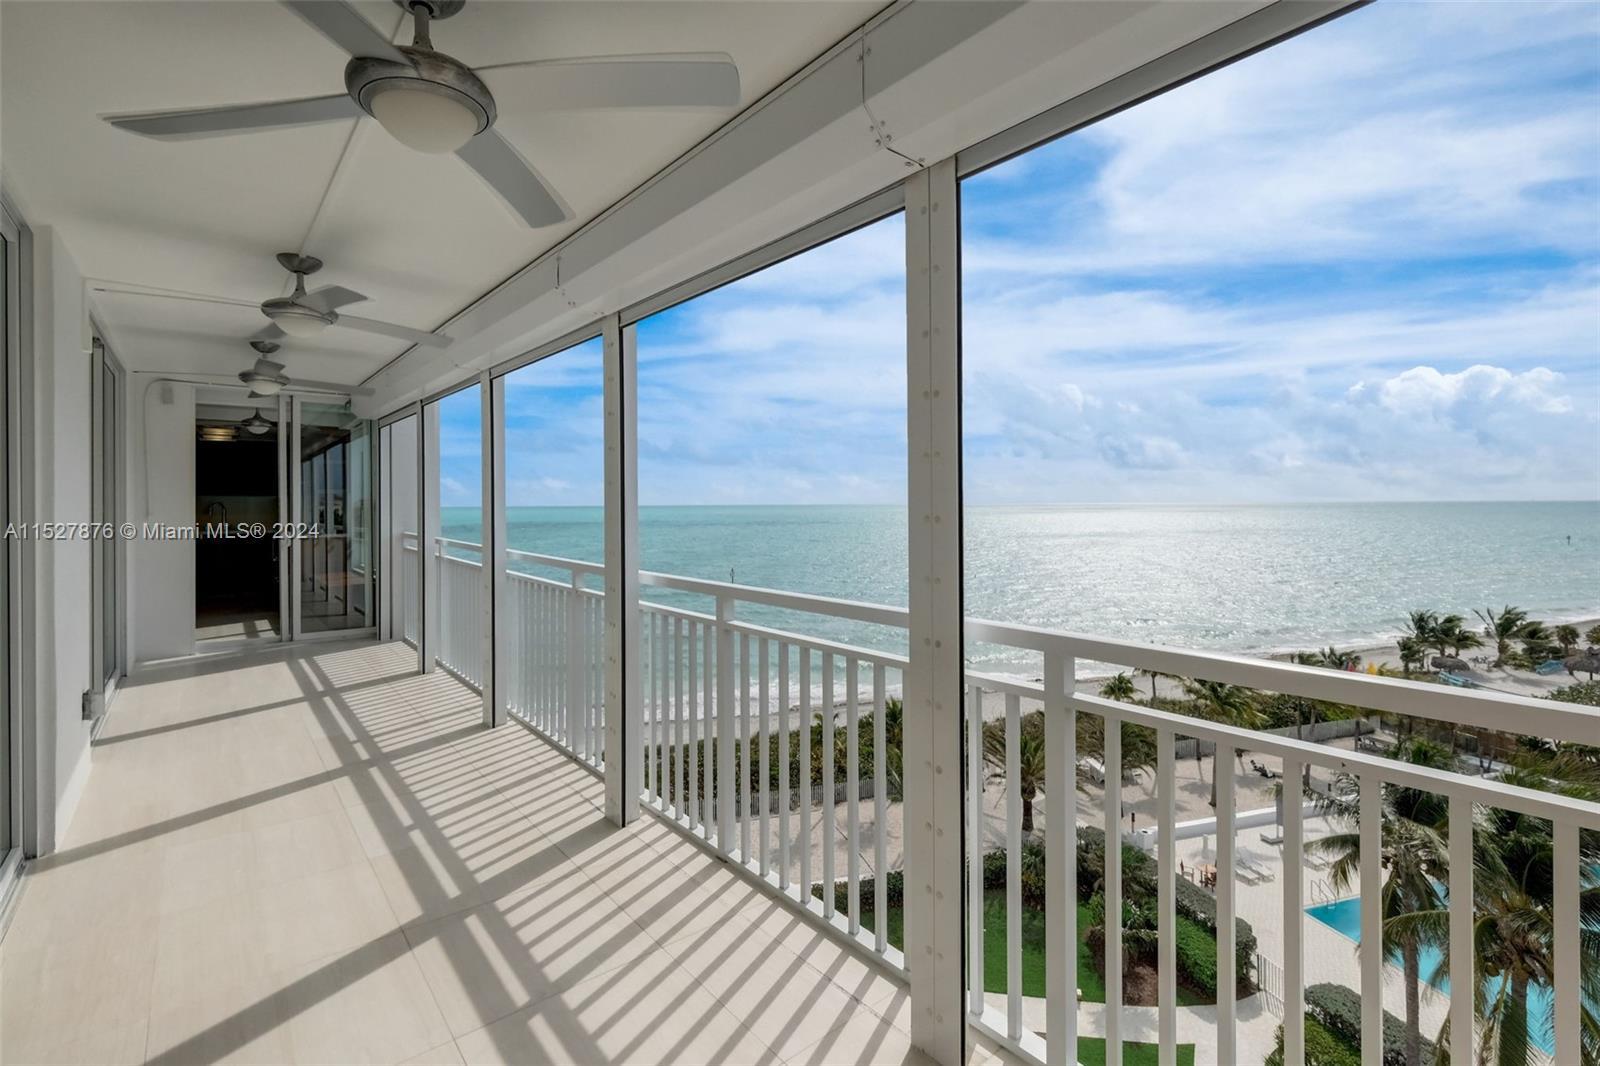 Welcome to THE SANDS of Key Biscayne! Your piece of paradise above the sea. Fully remodeled 3 bed/3b